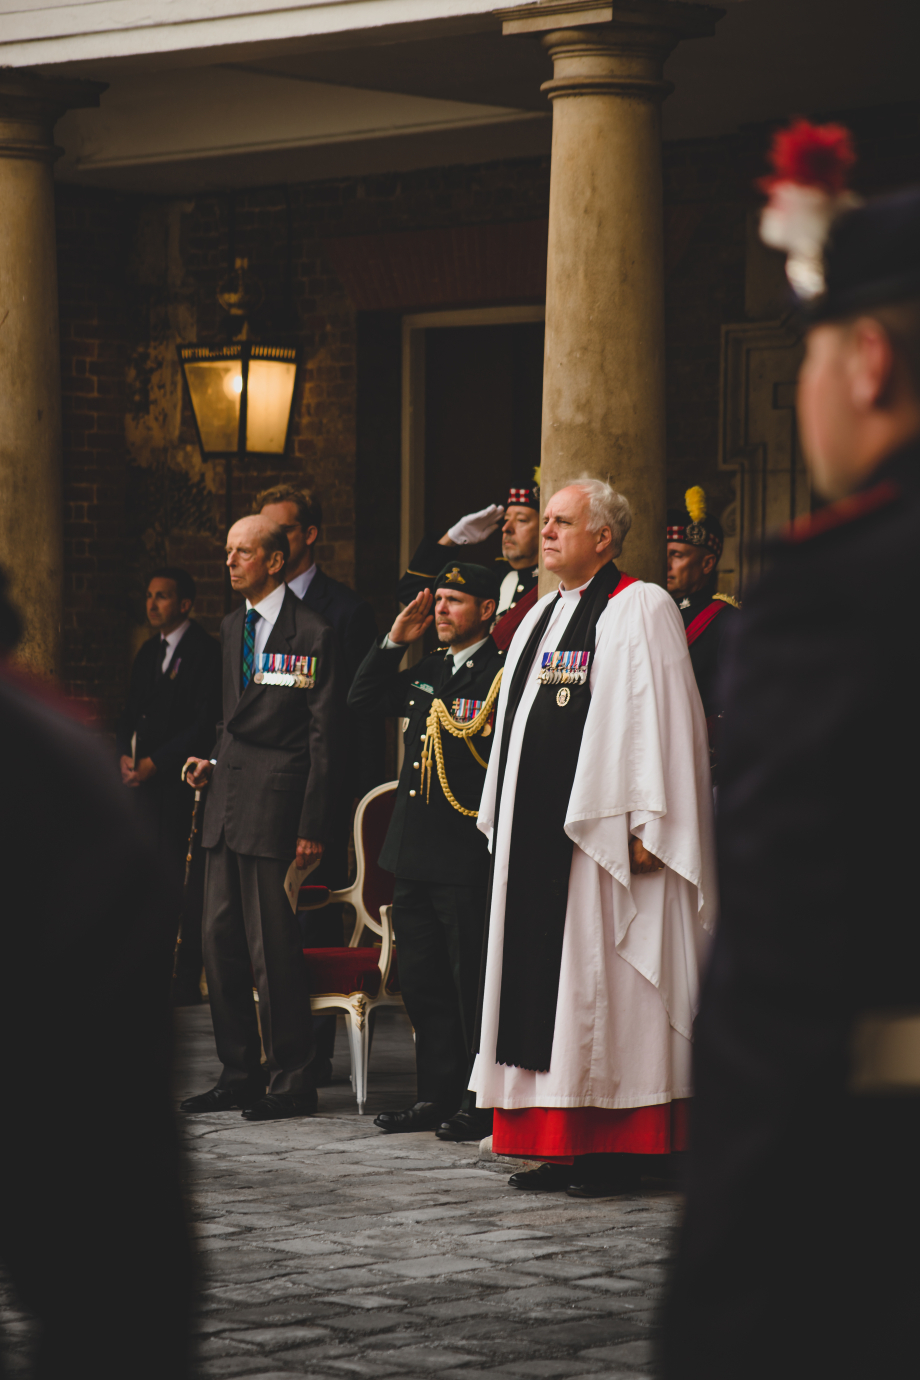 The Duke of Kent observes a Drumhead Service in Colour Court, St James’s Palace